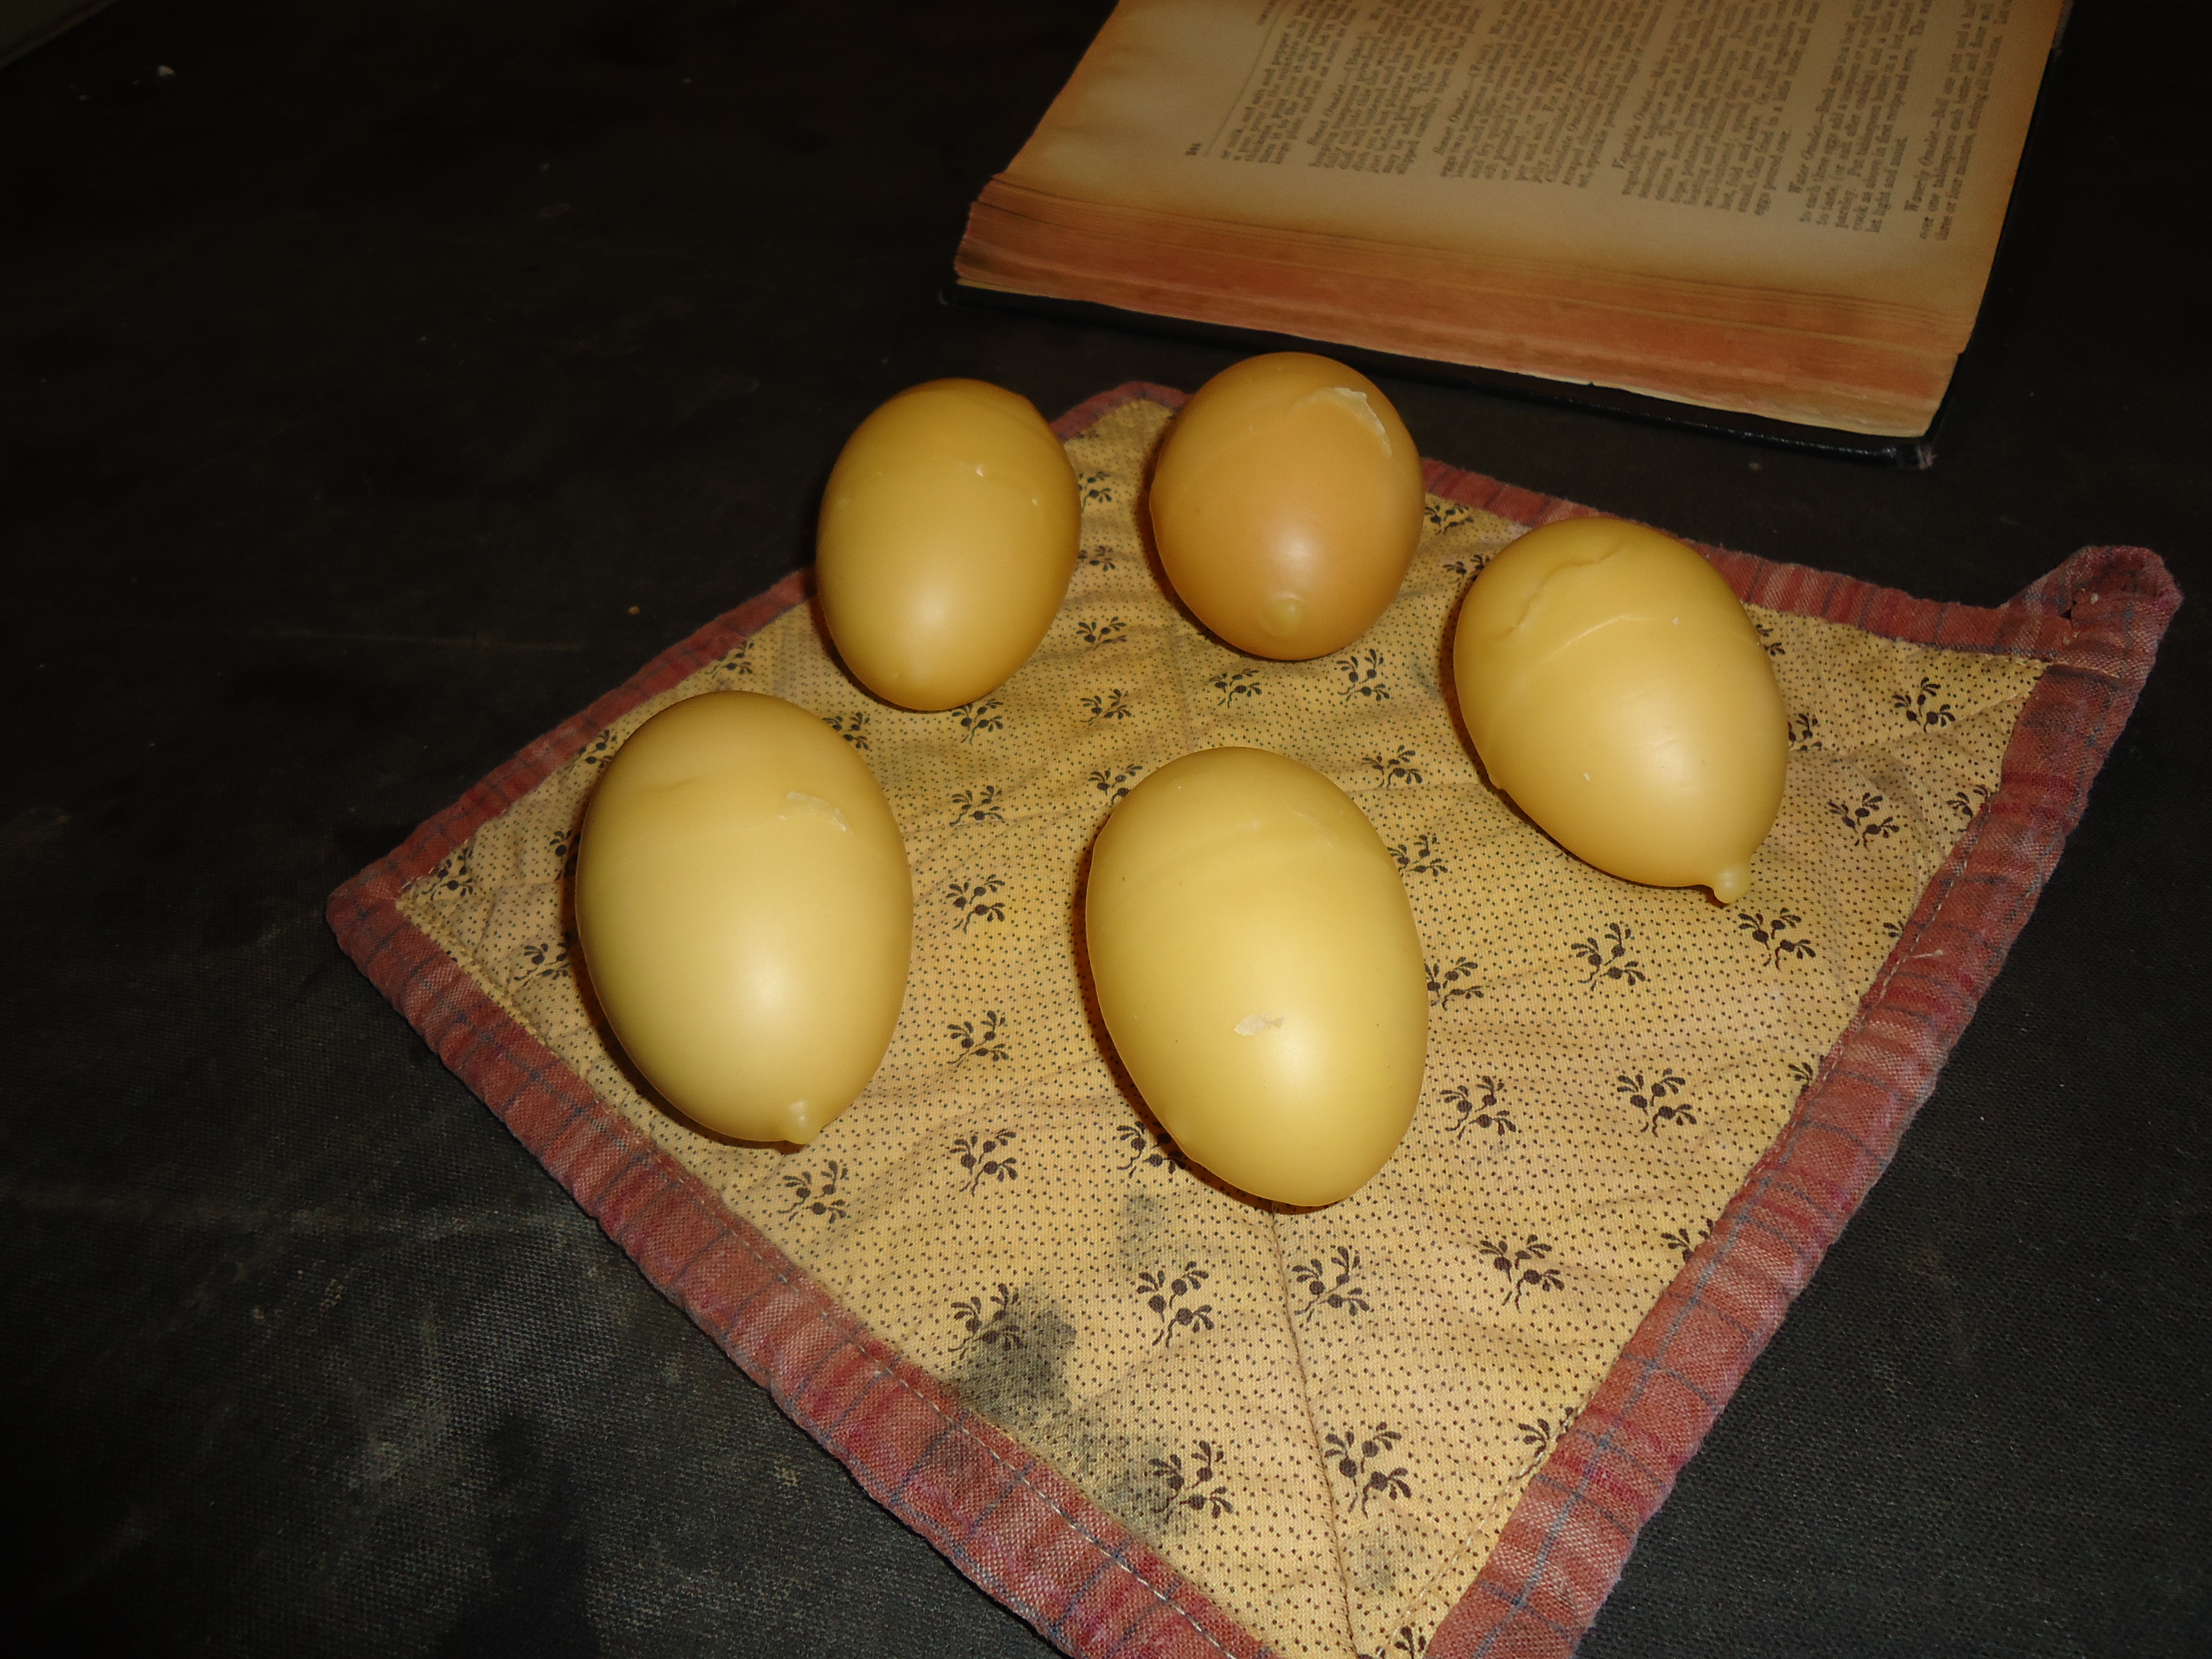 These eggs have been dipped in beeswax to help preserve them to leaner times.